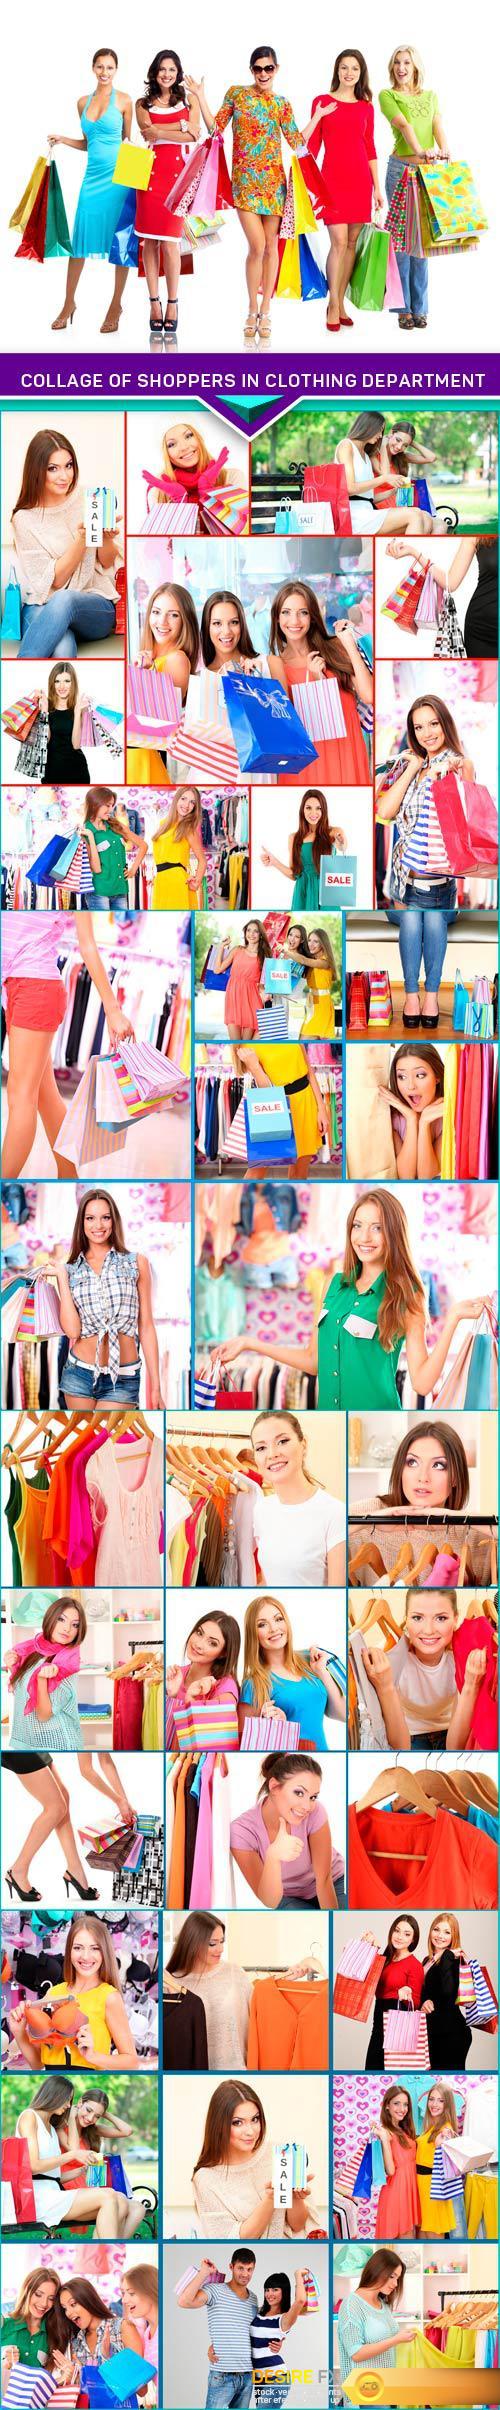 Collage of shoppers in clothing department 5x JPEG